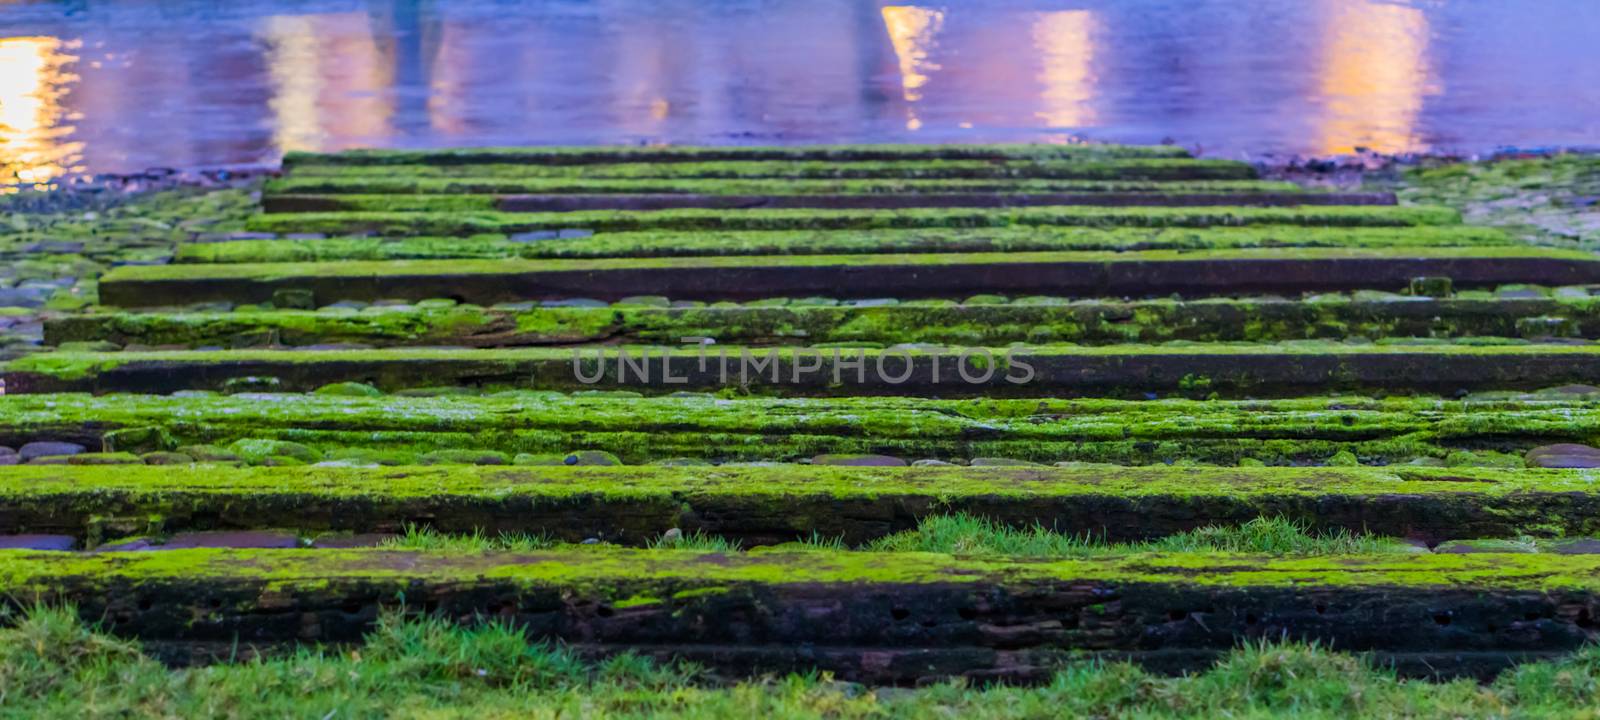 soothing nature background of mossy wooden beams and water reflecting light at night